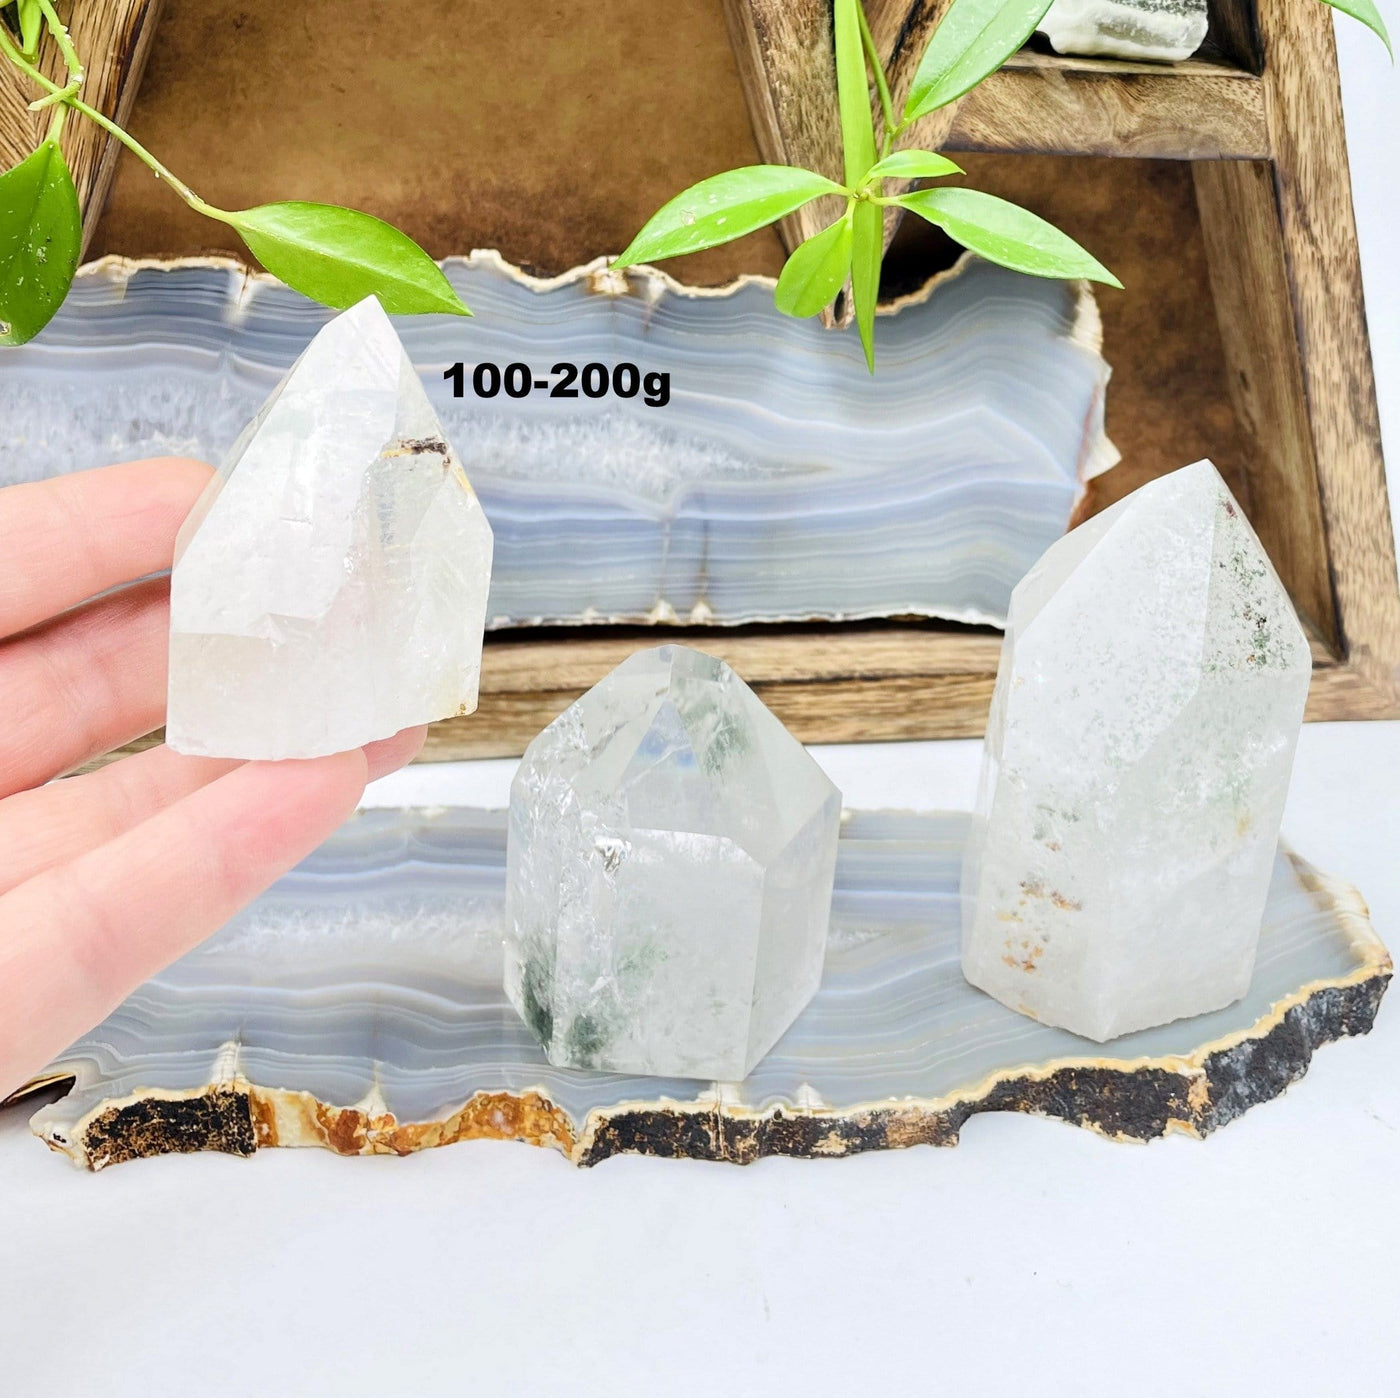 100-200g semi-polished quartz with chlorite point in hand for size reference with others on display